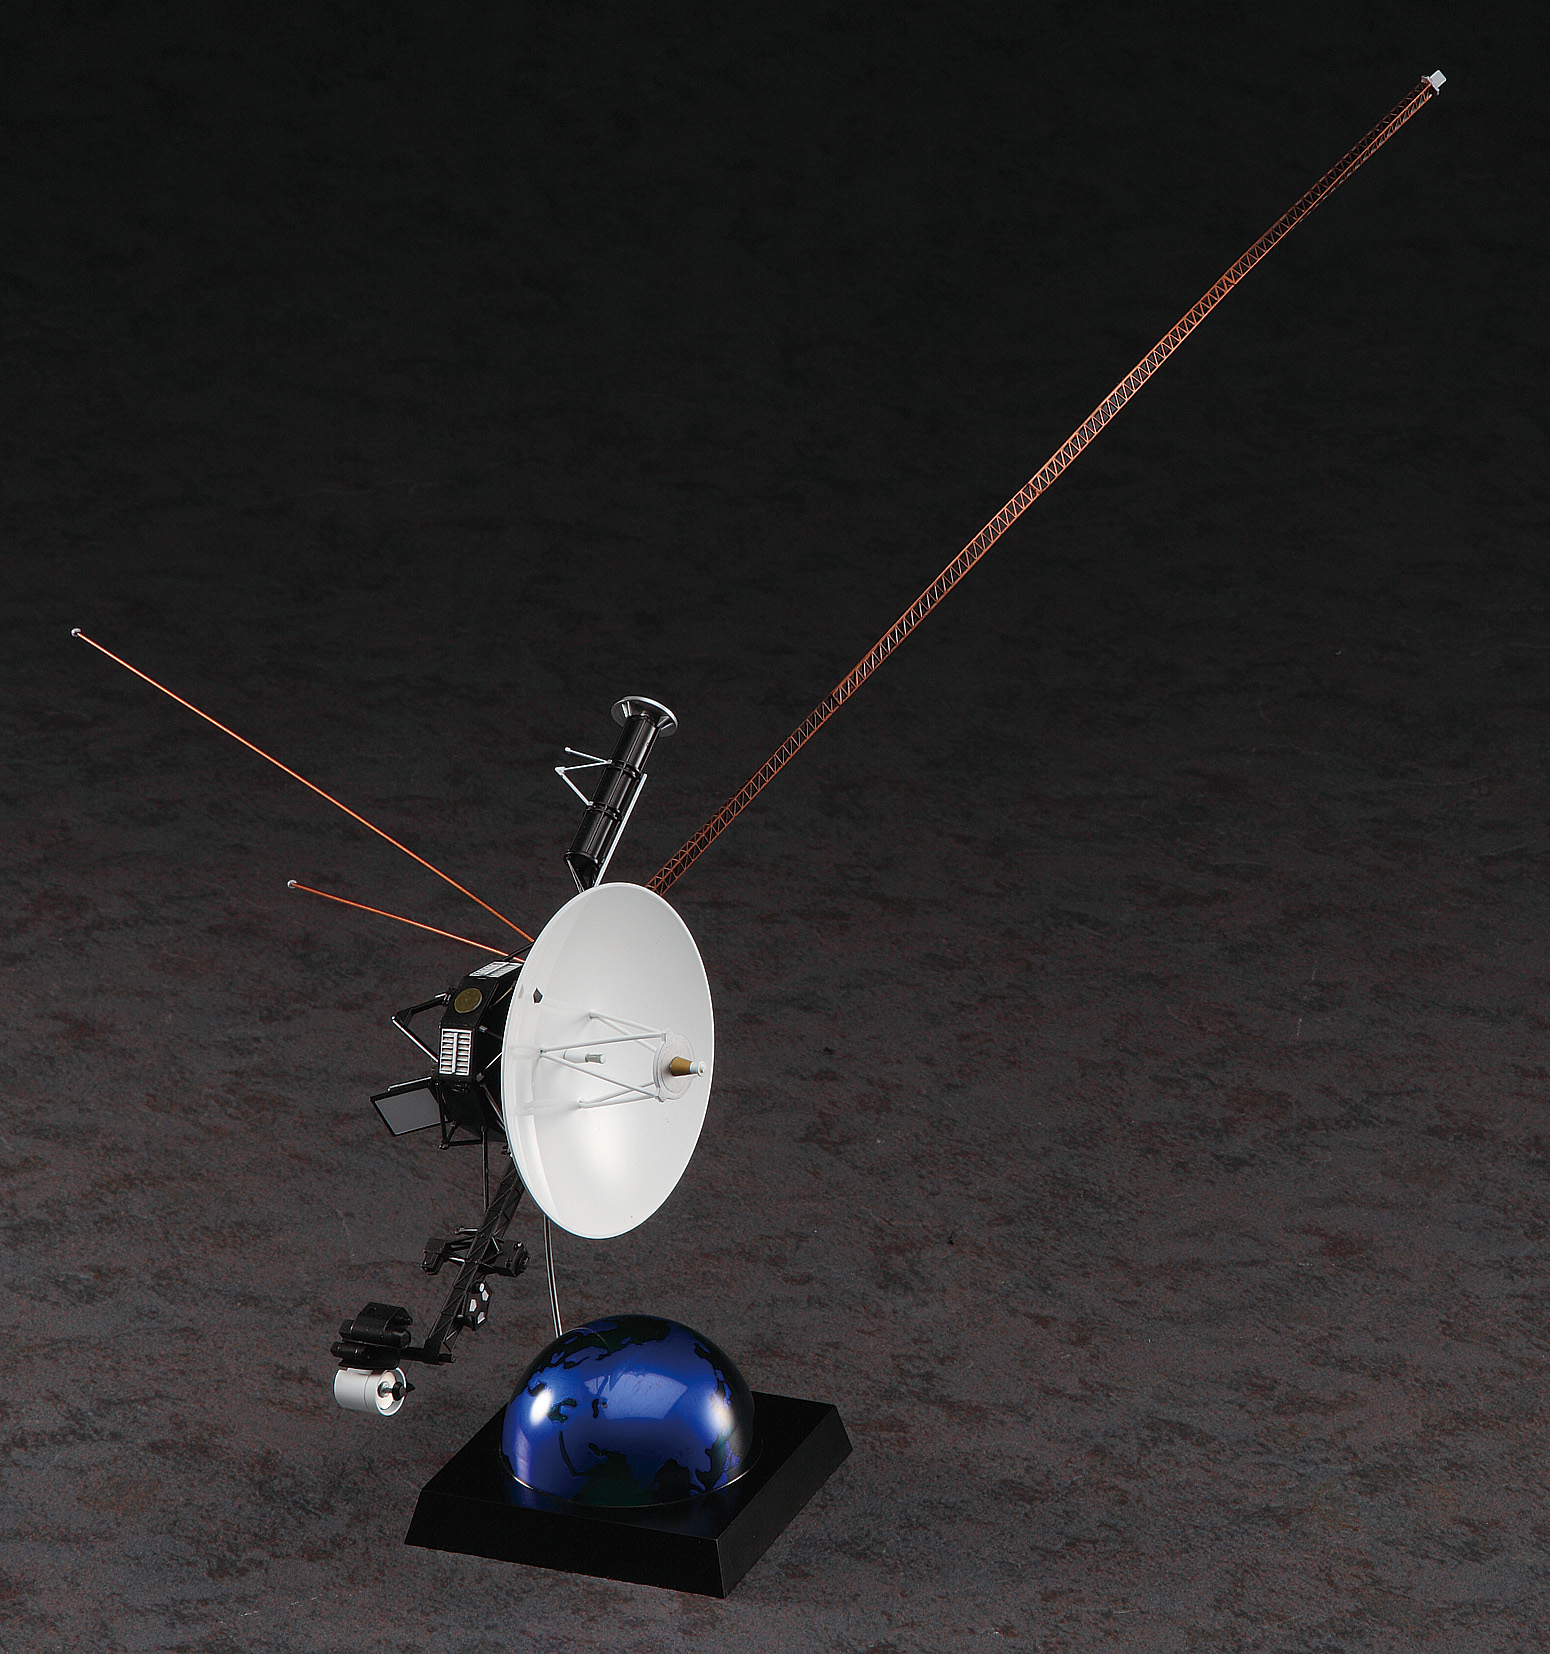 1/48 science world no person space probe VoyageryJapanese plastic modelz 